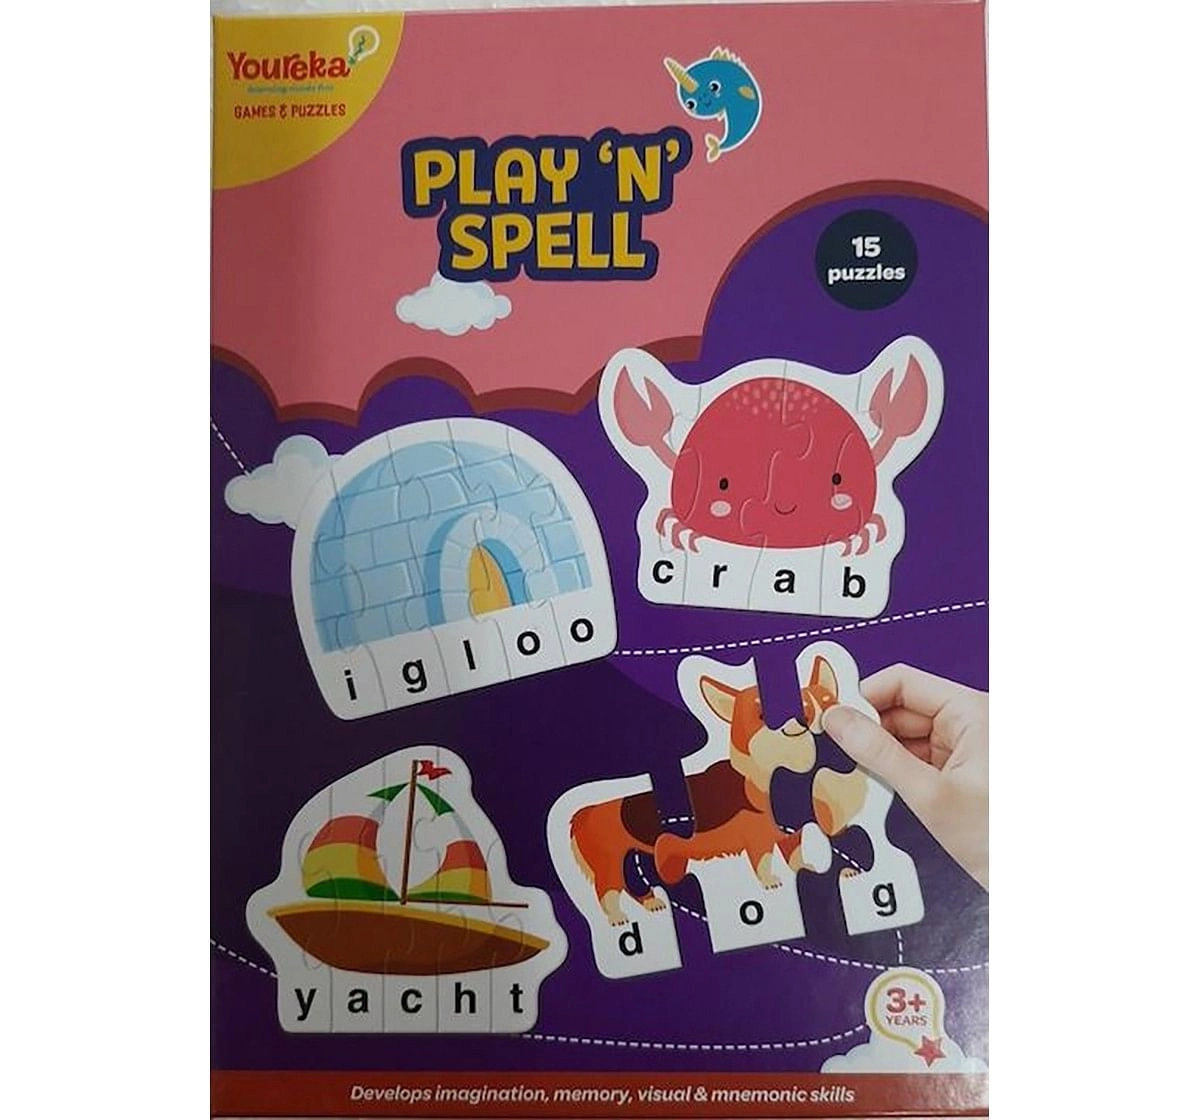 Youreka Play 'n' Spell Puzzle for Kids age 3Y+ 